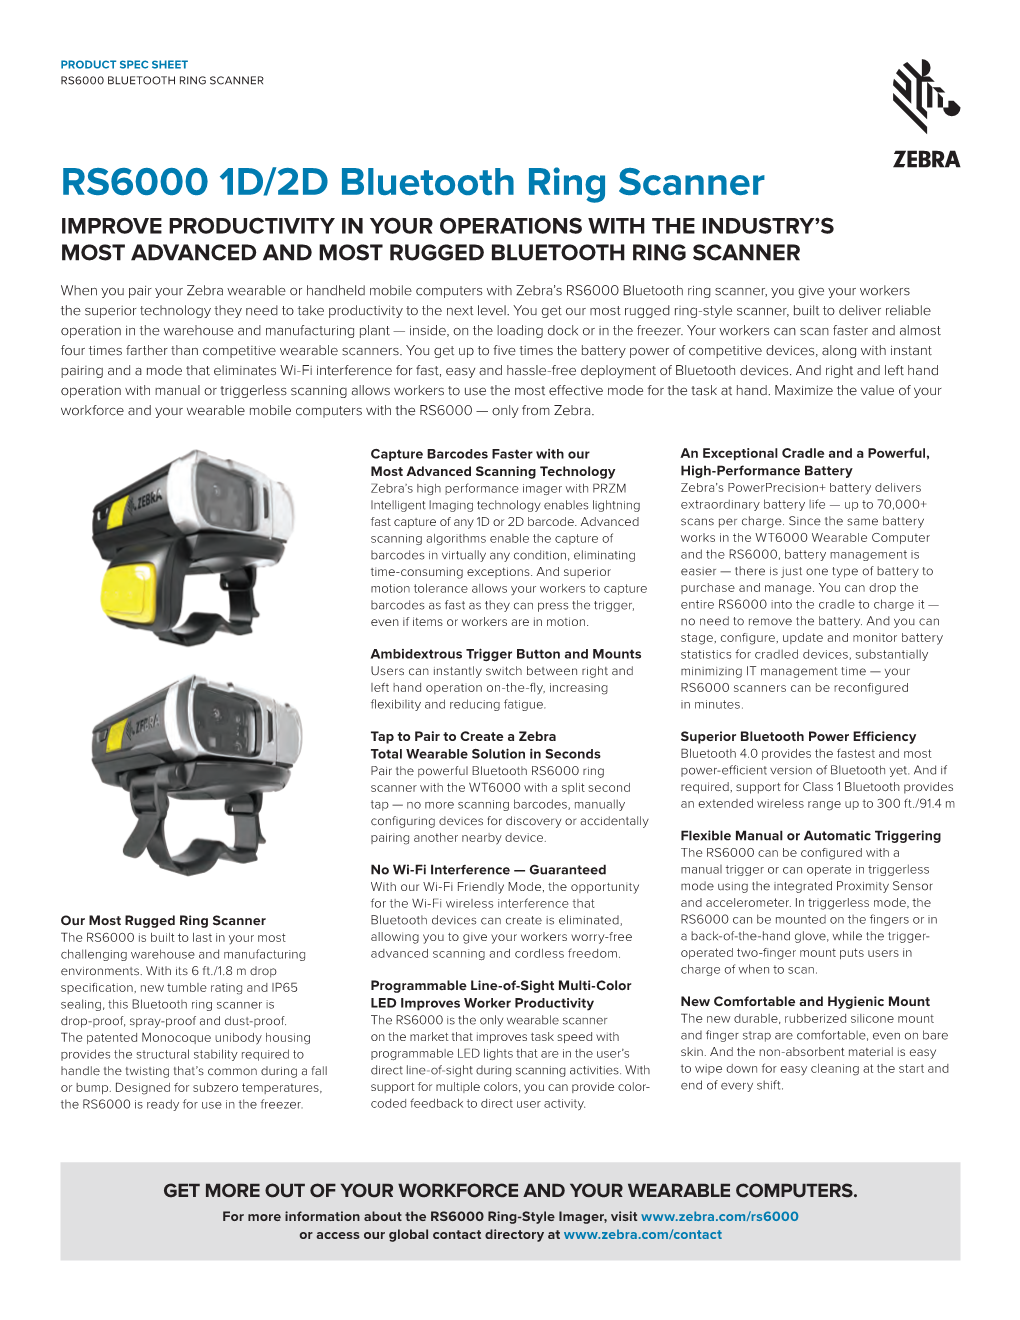 RS6000 1D/2D Bluetooth Ring Scanner Imp Rove Productivity in Your Operations with the Industry’S Most Advanced and Most Rugged Bluetooth Ring Scanner